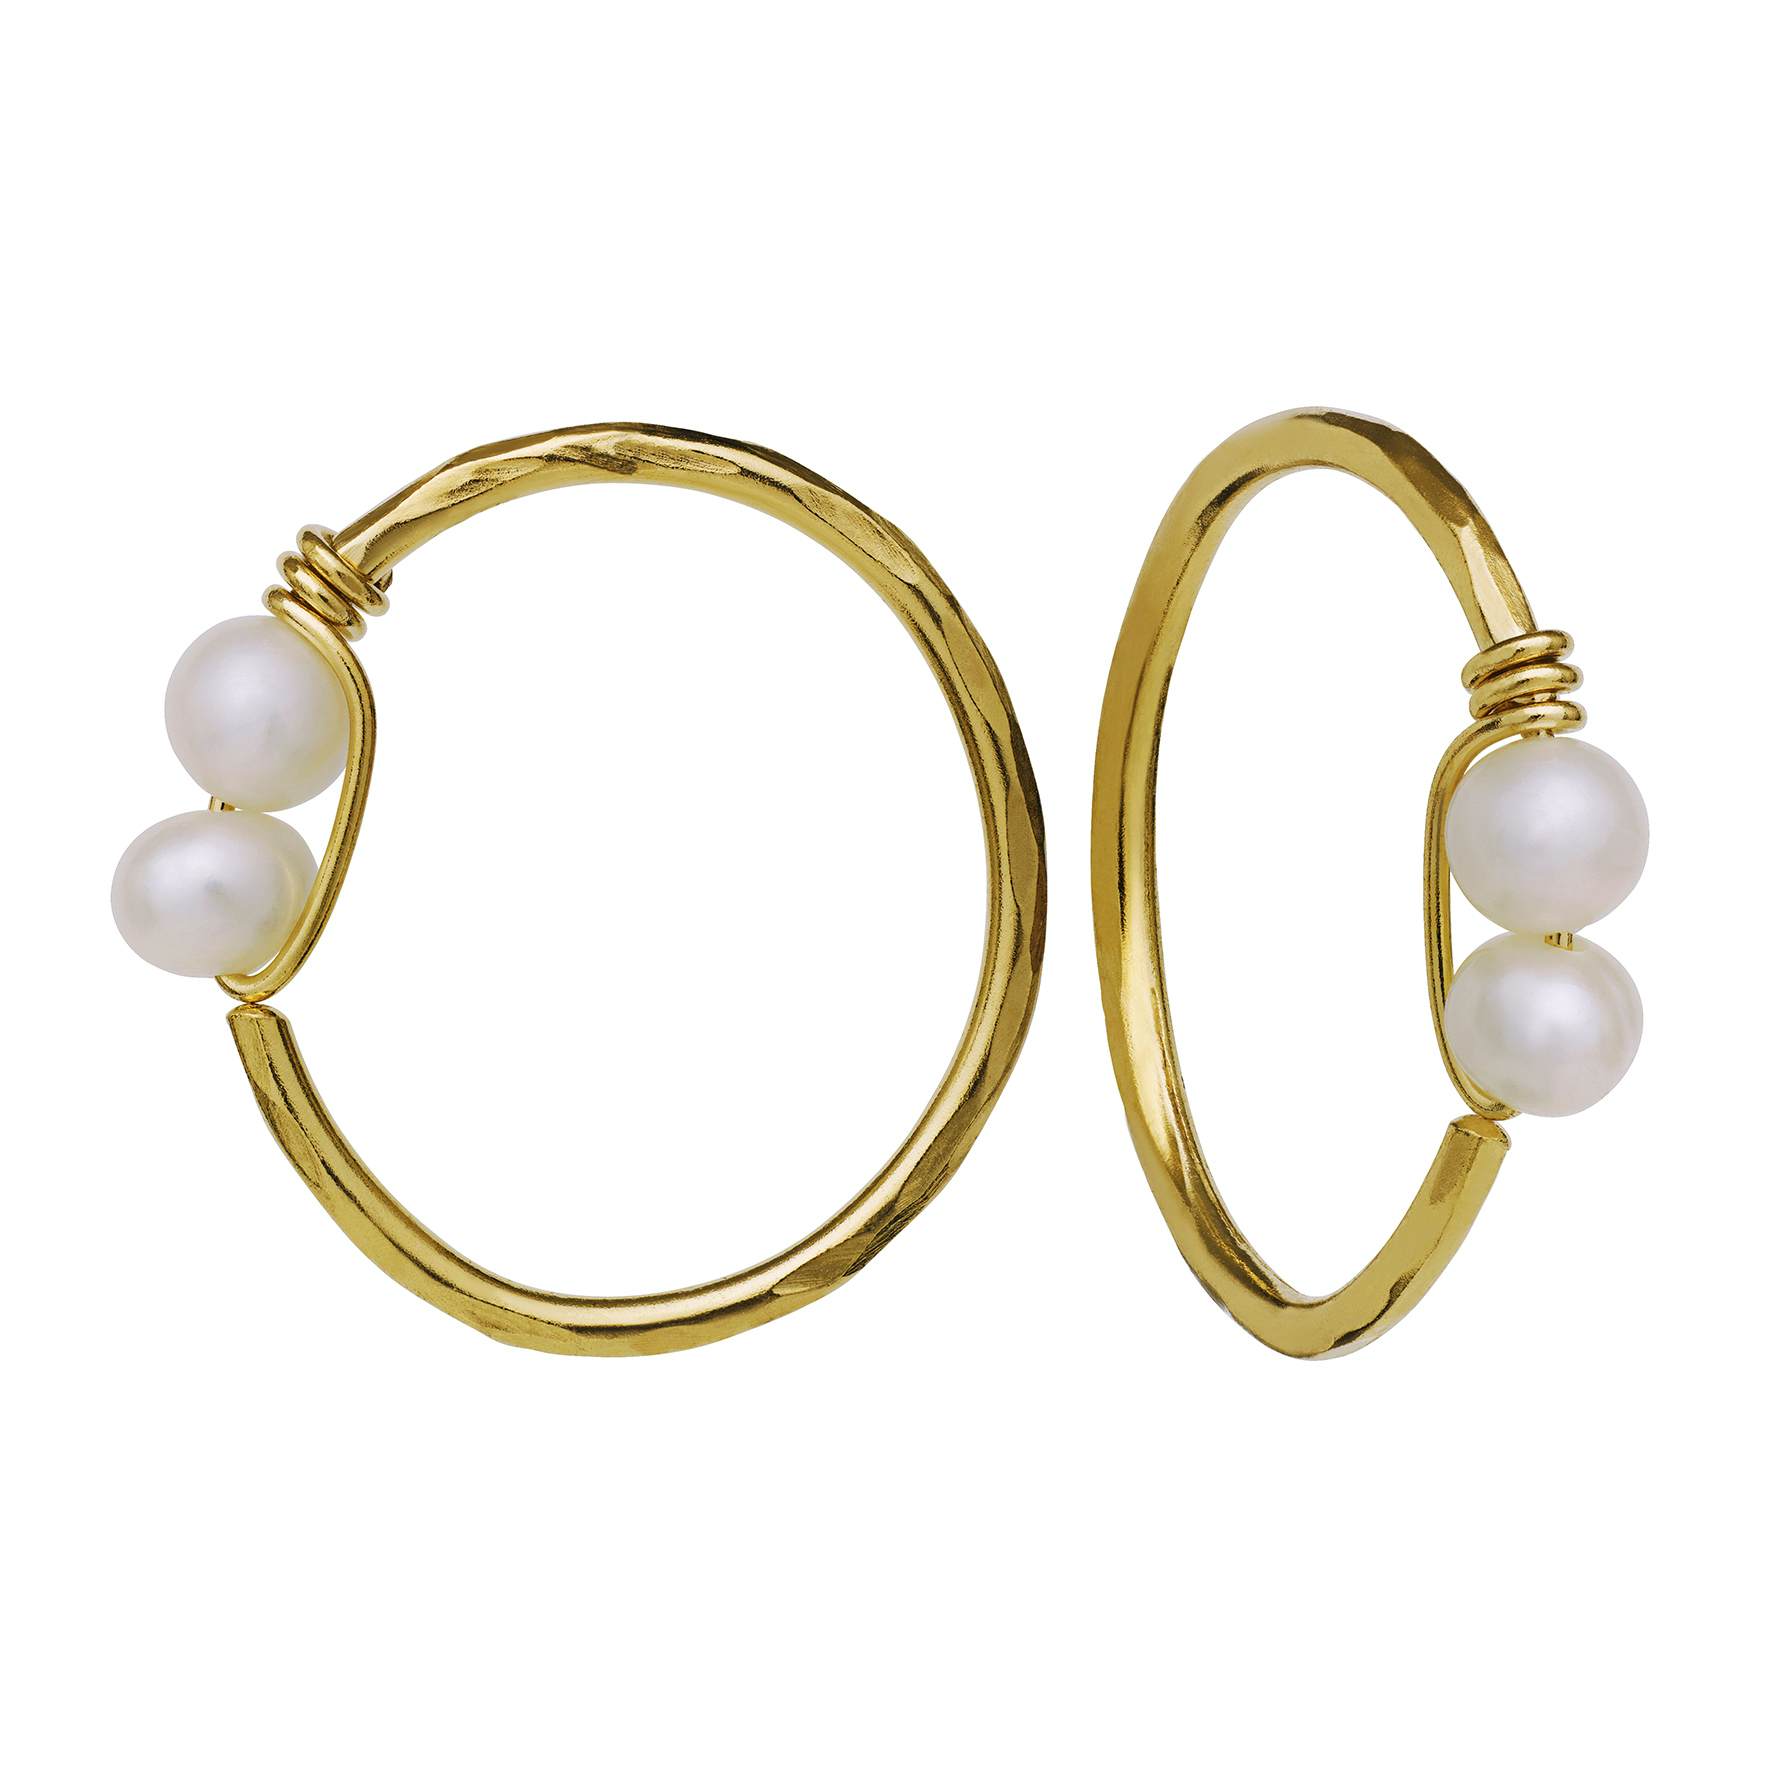 Donna Earrings from Maanesten in Goldplated-Silver Sterling 925|Freshwater Pearl